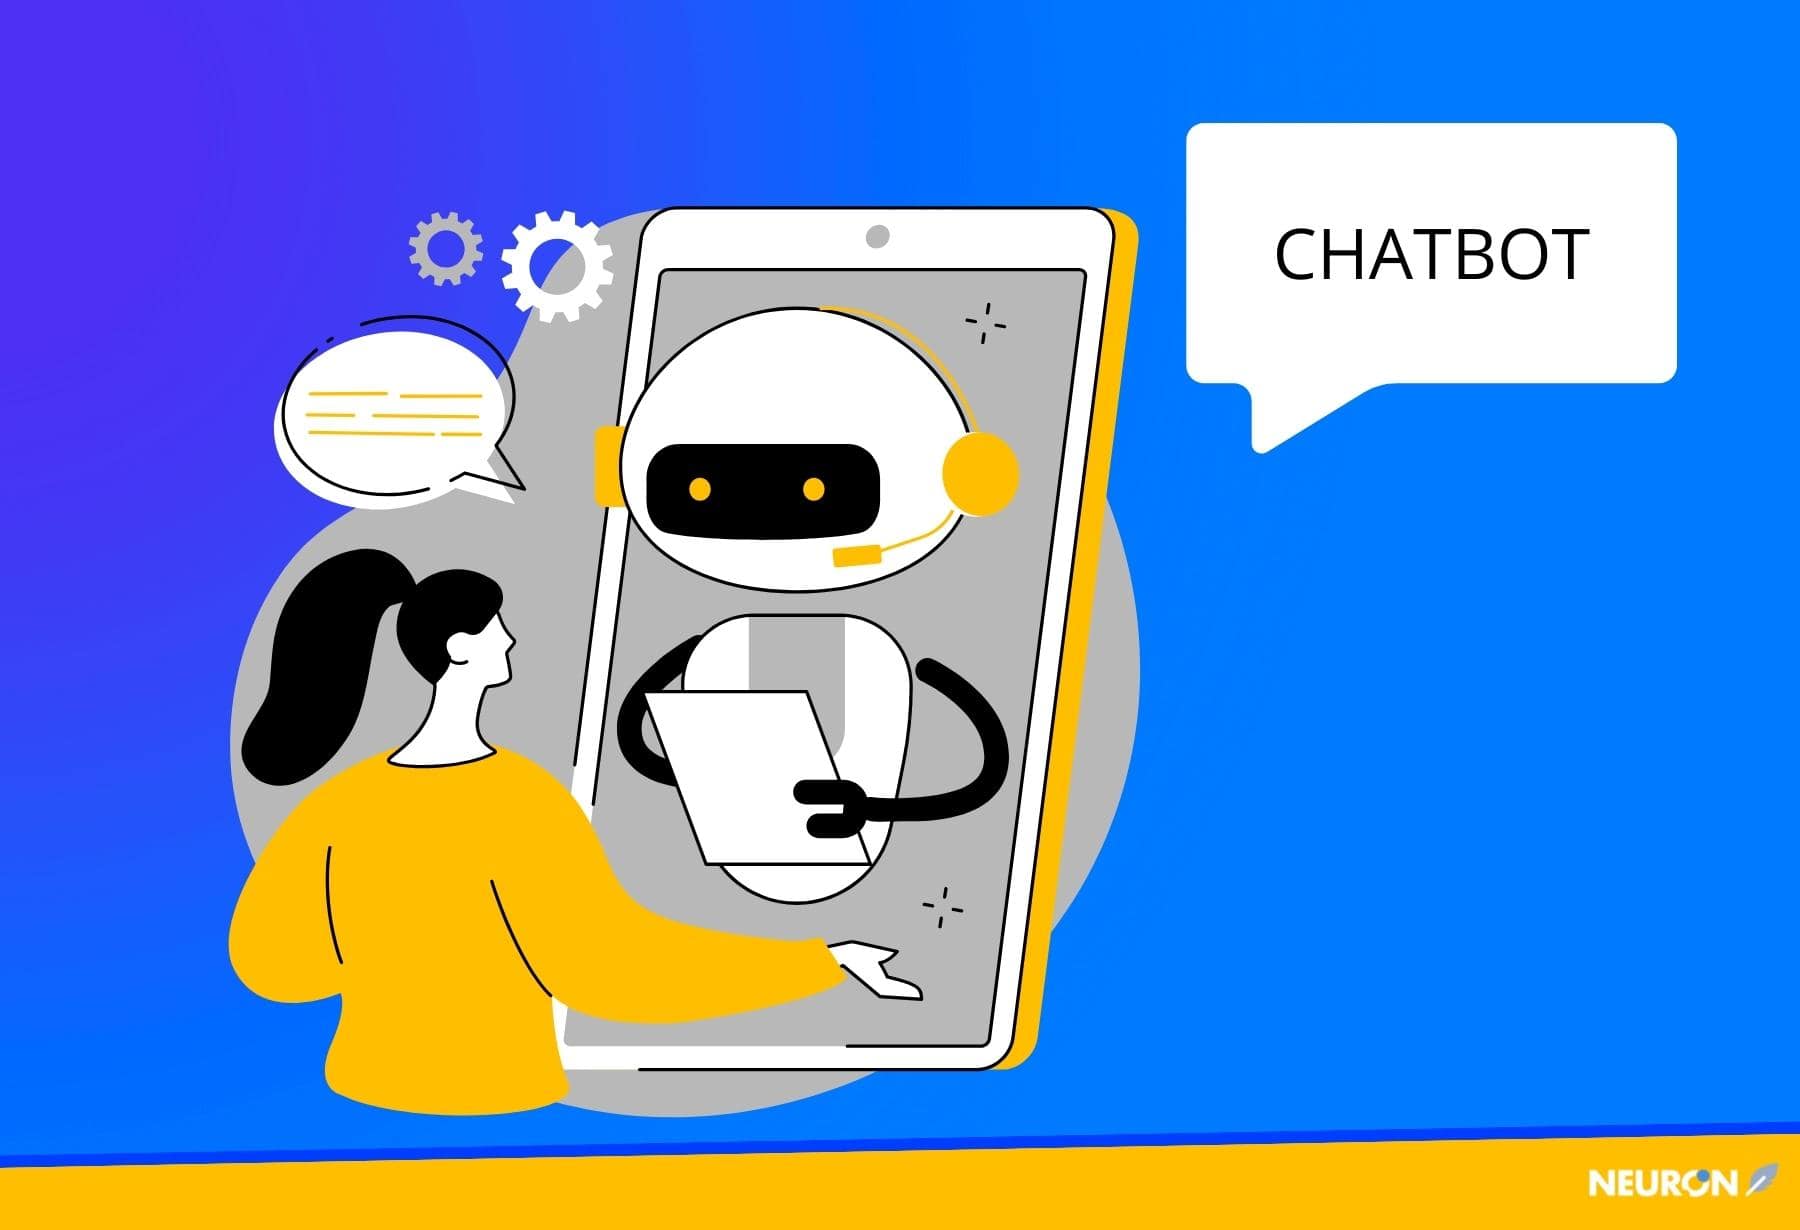 Chatbot as AI Personal Assistants: What You Need to Know About the Advantages and Dangers for Your Data.